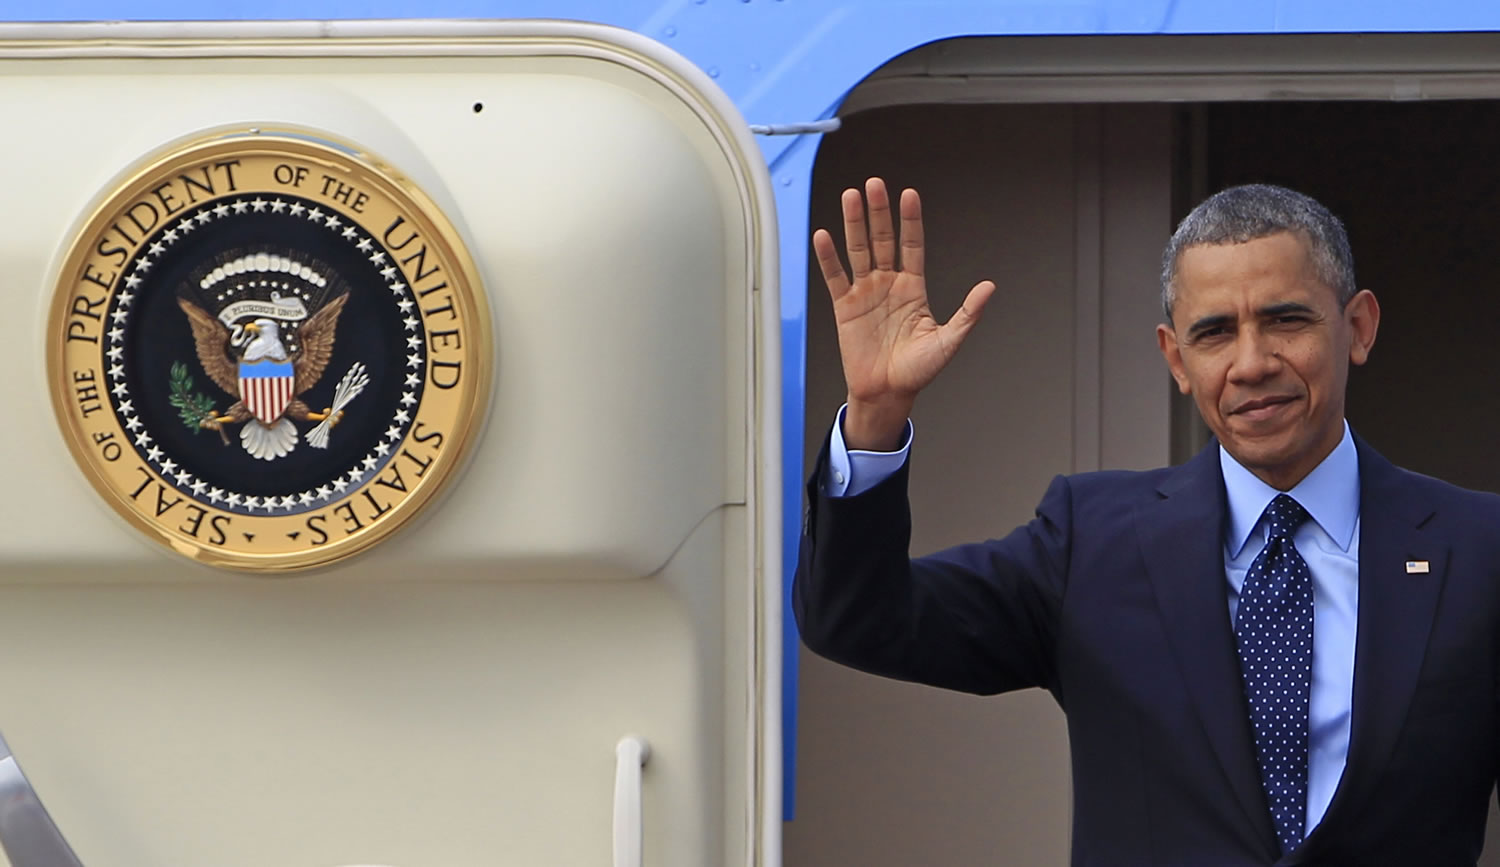 President Barack Obama waves from Air Force One during his tour of nations in Asia.